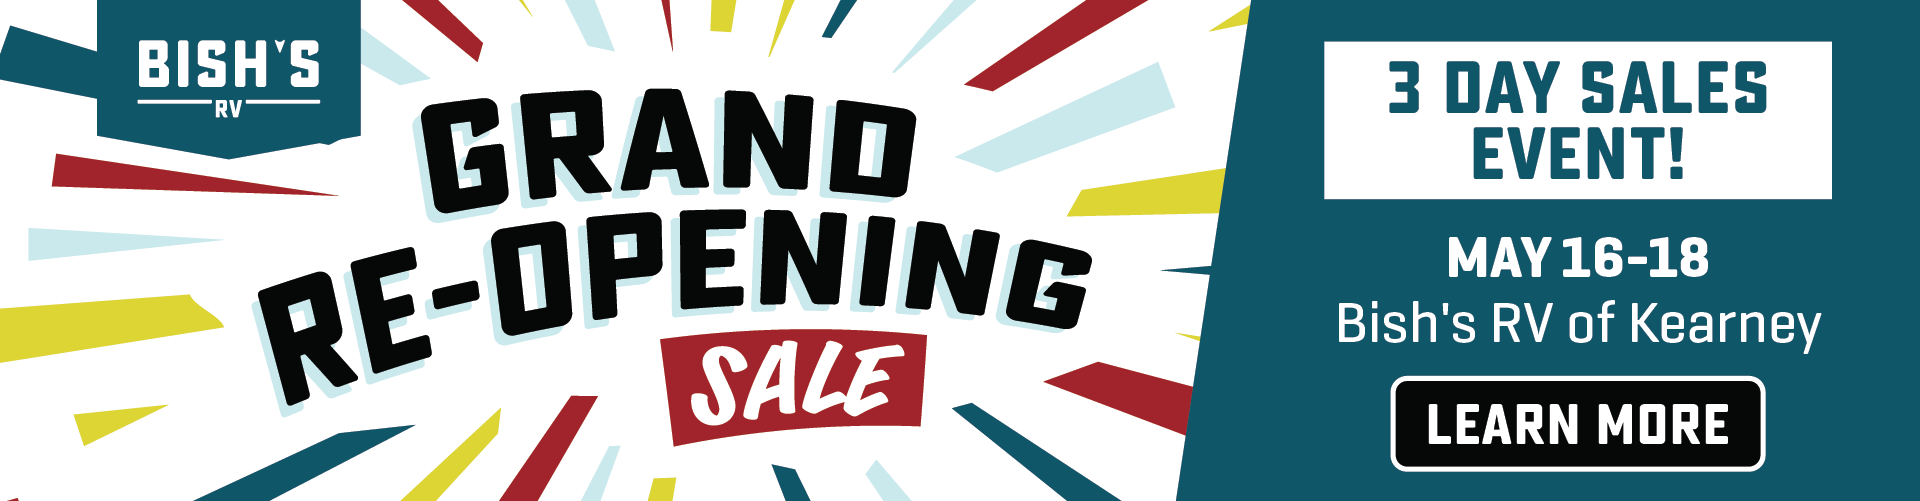 Grand Re-Opening Sale - May 16-18 - Bish's RV of Kearney